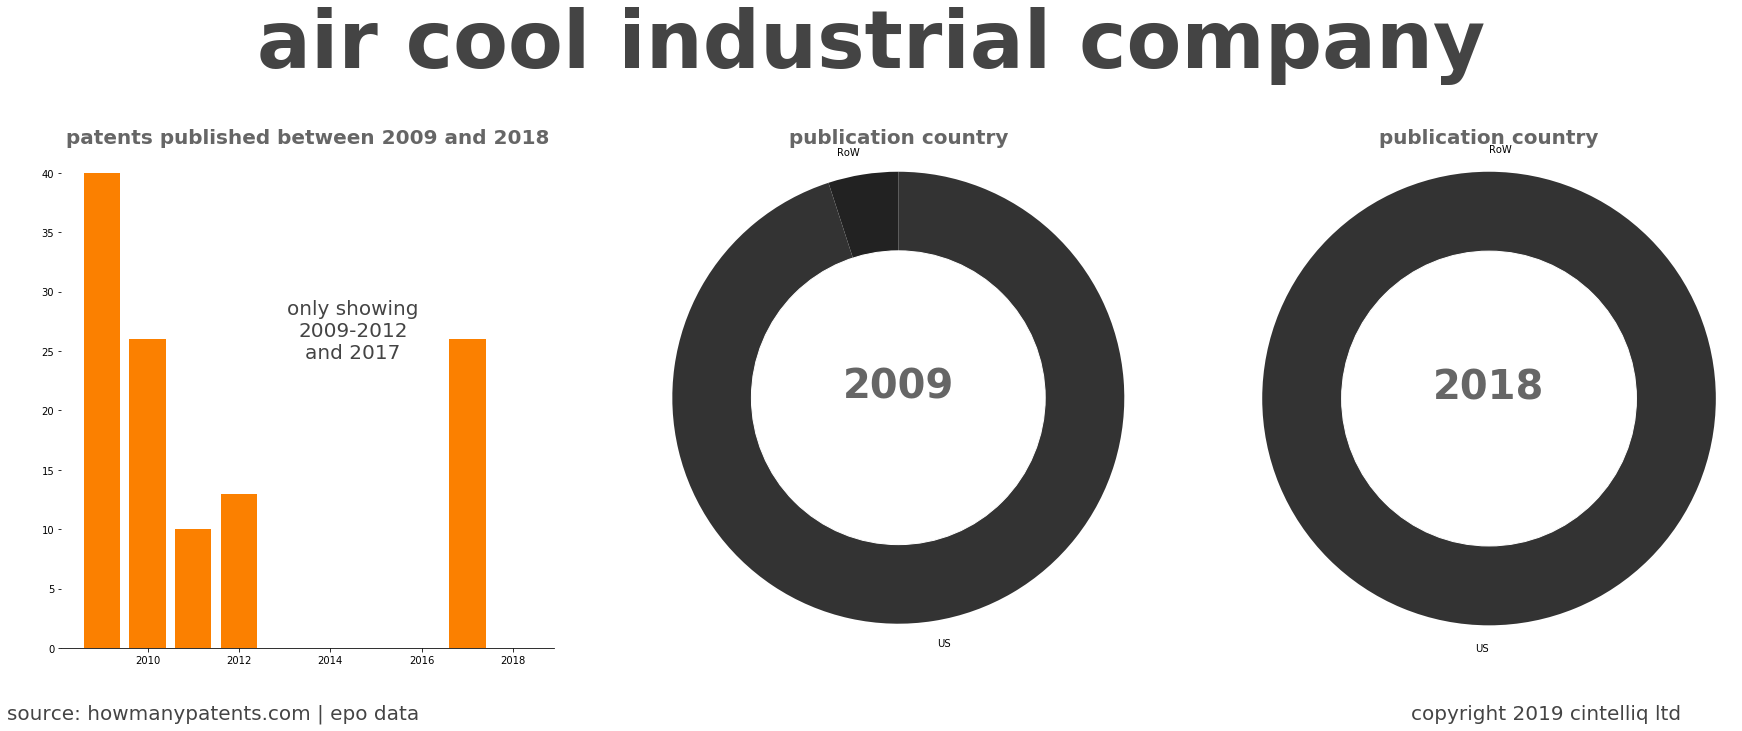 summary of patents for Air Cool Industrial Company